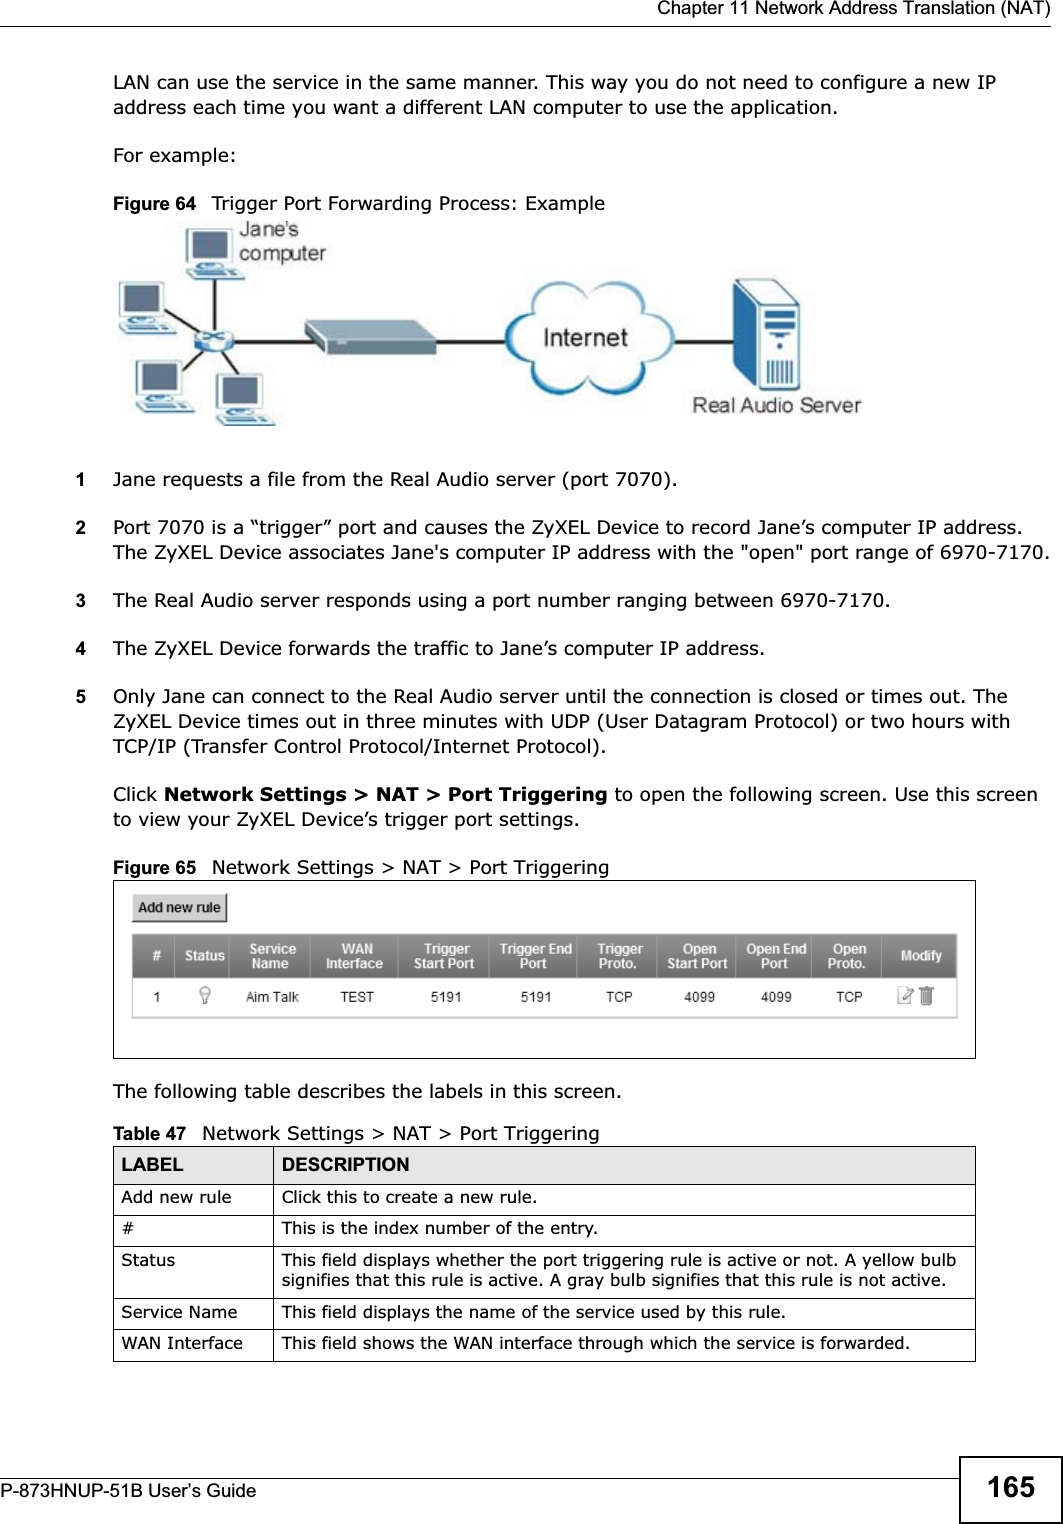  Chapter 11 Network Address Translation (NAT)P-873HNUP-51B User’s Guide 165LAN can use the service in the same manner. This way you do not need to configure a new IP address each time you want a different LAN computer to use the application.For example:Figure 64   Trigger Port Forwarding Process: Example1Jane requests a file from the Real Audio server (port 7070).2Port 7070 is a “trigger” port and causes the ZyXEL Device to record Jane’s computer IP address. The ZyXEL Device associates Jane&apos;s computer IP address with the &quot;open&quot; port range of 6970-7170.3The Real Audio server responds using a port number ranging between 6970-7170.4The ZyXEL Device forwards the traffic to Jane’s computer IP address. 5Only Jane can connect to the Real Audio server until the connection is closed or times out. The ZyXEL Device times out in three minutes with UDP (User Datagram Protocol) or two hours with TCP/IP (Transfer Control Protocol/Internet Protocol). Click Network Settings &gt; NAT &gt; Port Triggering to open the following screen. Use this screen to view your ZyXEL Device’s trigger port settings.Figure 65   Network Settings &gt; NAT &gt; Port Triggering The following table describes the labels in this screen. Table 47   Network Settings &gt; NAT &gt; Port TriggeringLABEL DESCRIPTIONAdd new rule Click this to create a new rule.#This is the index number of the entry.Status This field displays whether the port triggering rule is active or not. A yellow bulb signifies that this rule is active. A gray bulb signifies that this rule is not active.Service Name This field displays the name of the service used by this rule.WAN Interface This field shows the WAN interface through which the service is forwarded.